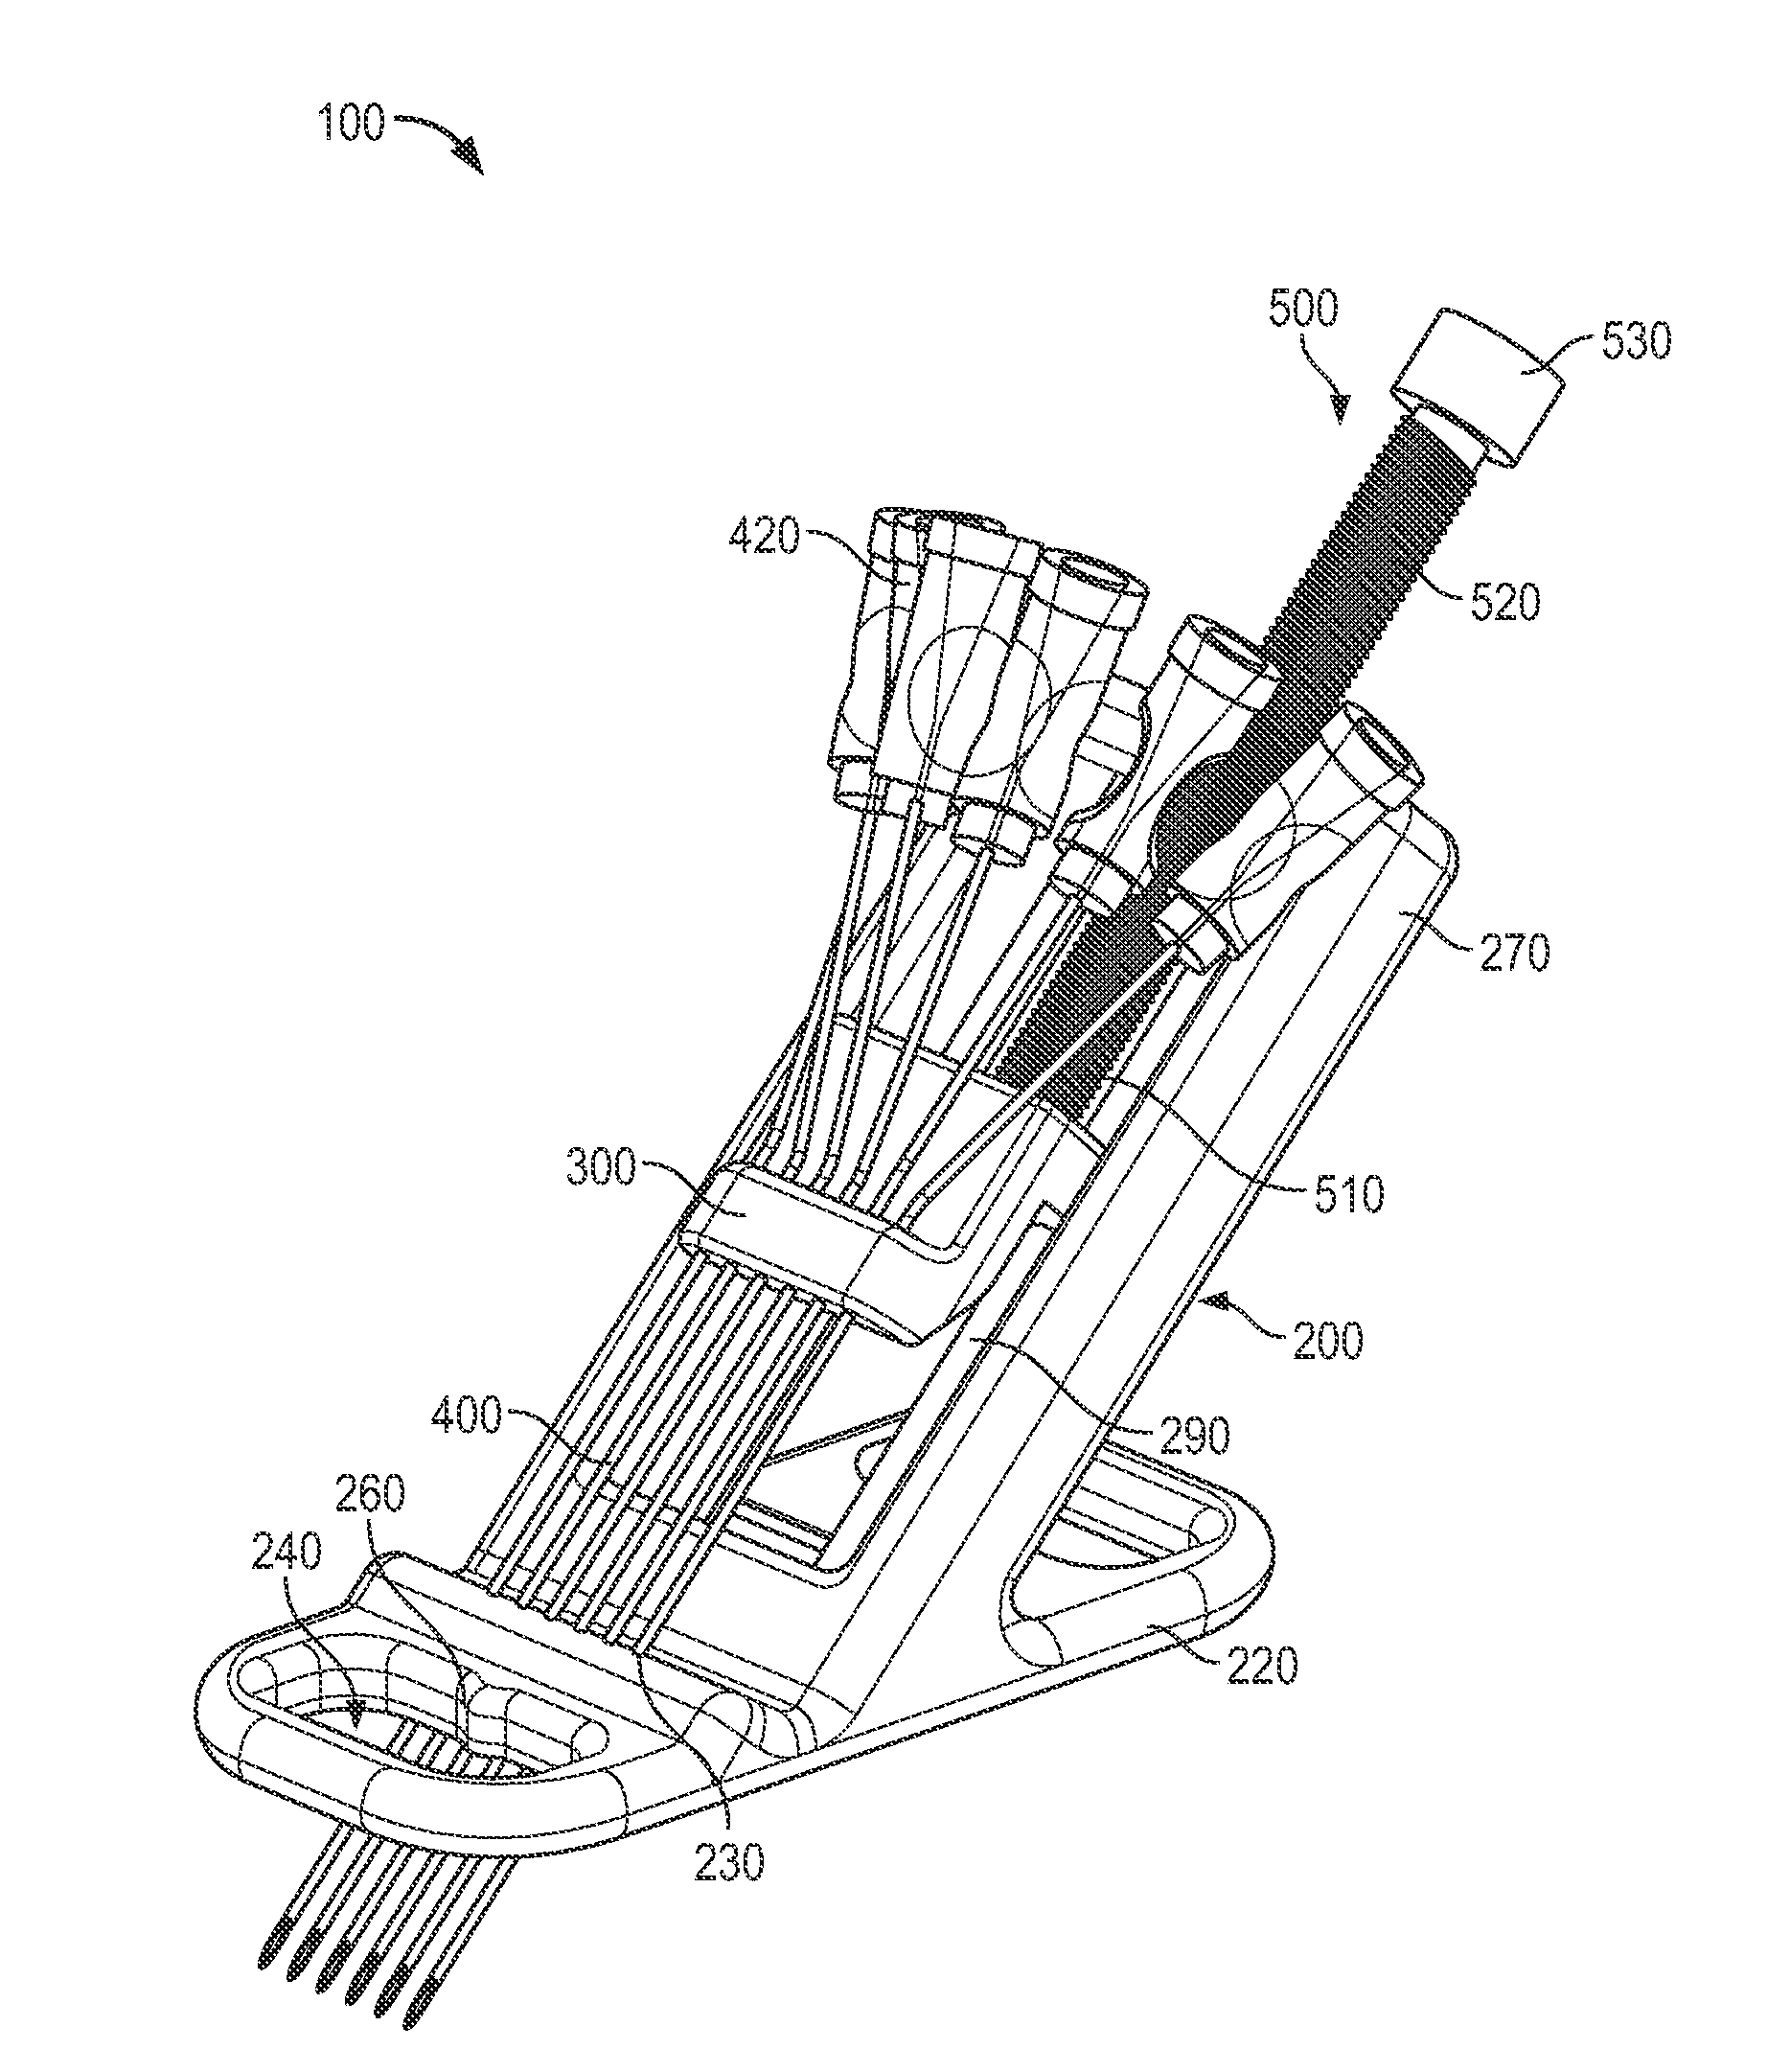 Vascular access systems and methods of use